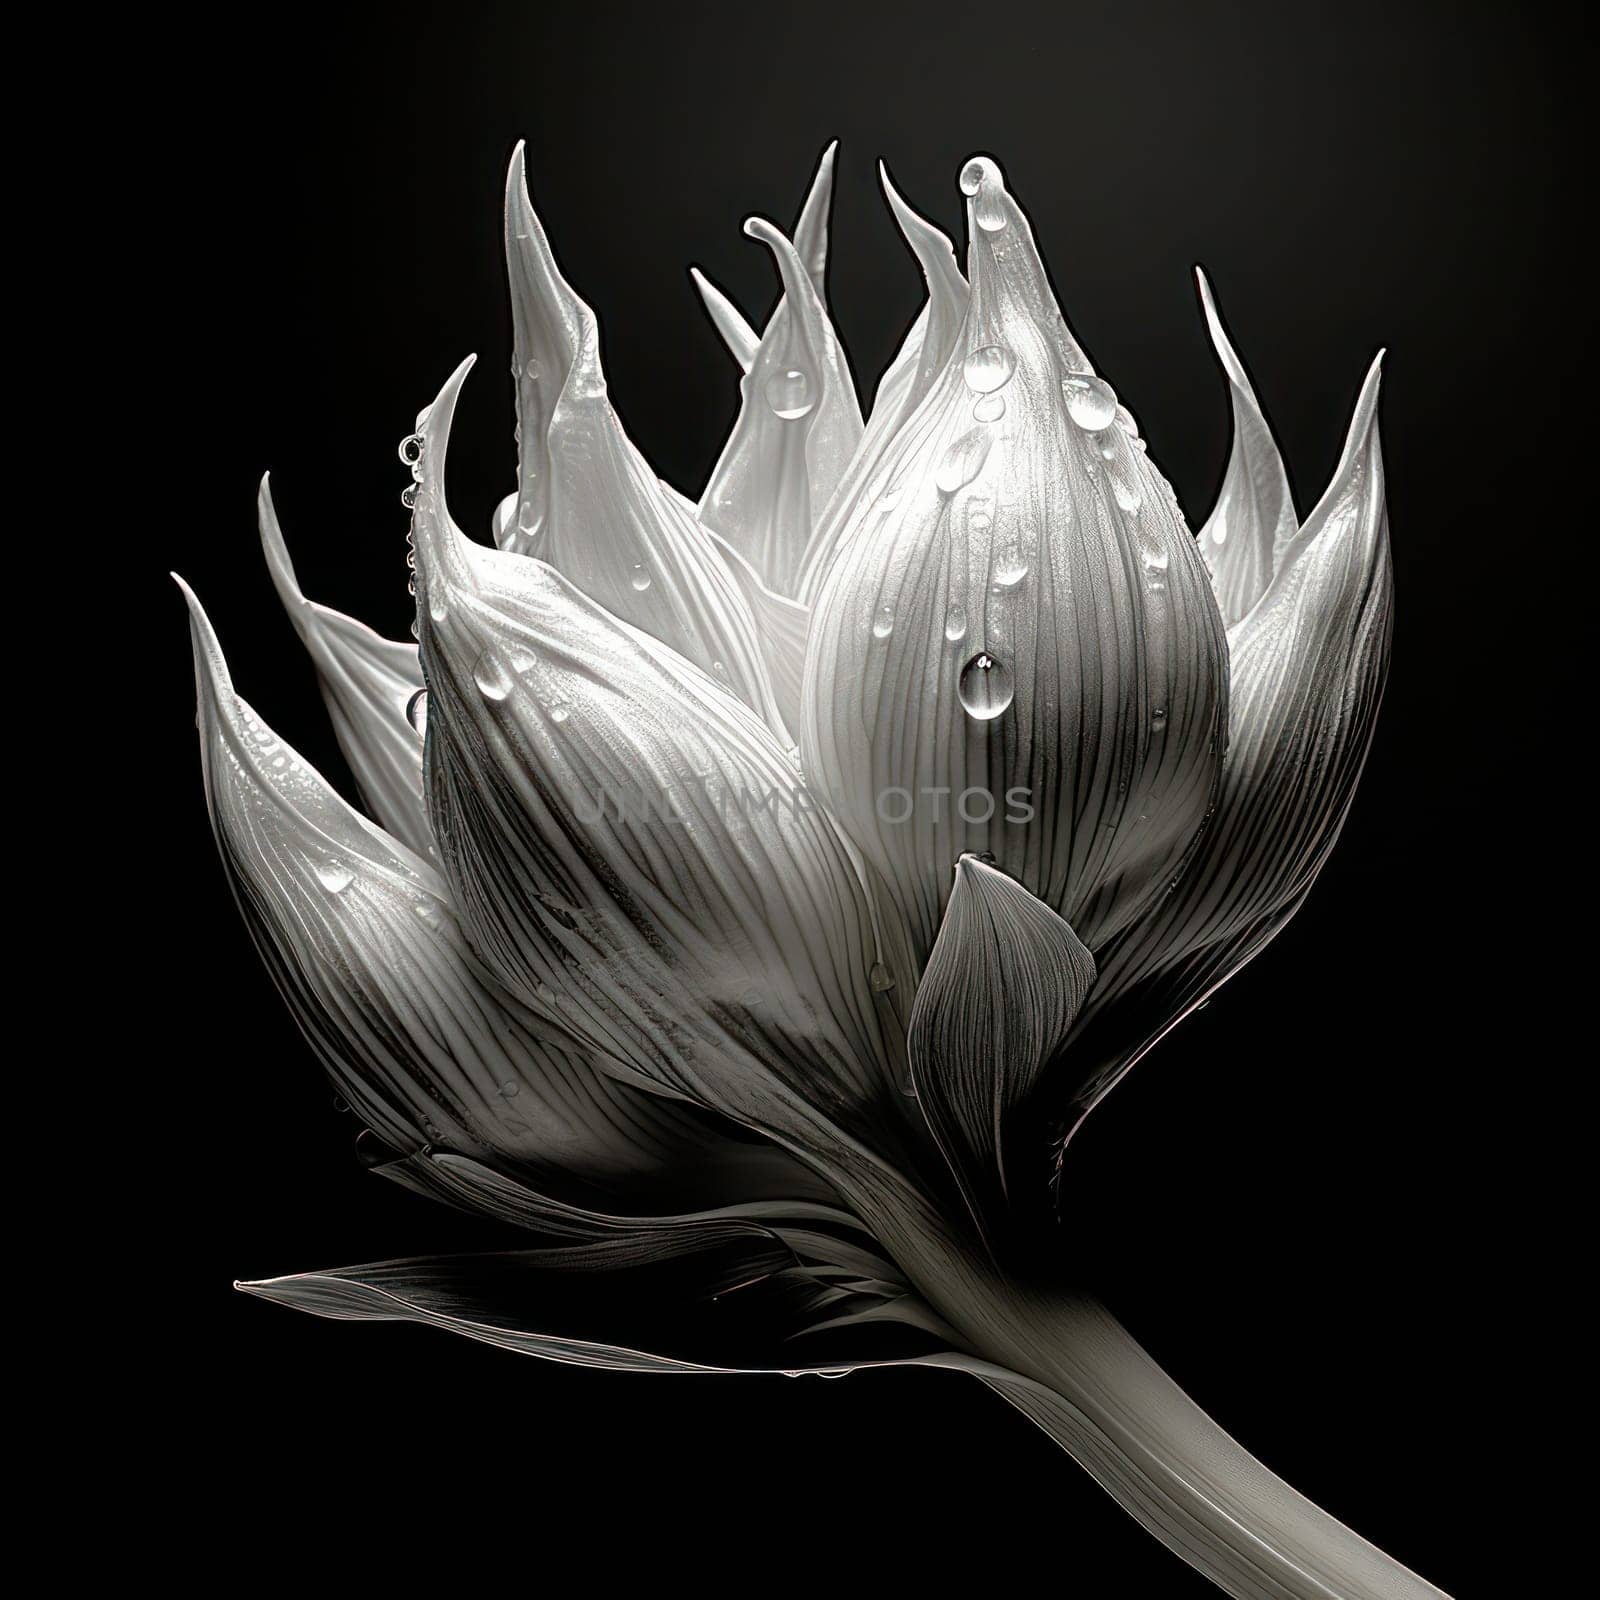 Floral Elegance: A Serene White Blooming Lotus, Embracing Nature's Beauty and Tranquility on a Bright Summer Day